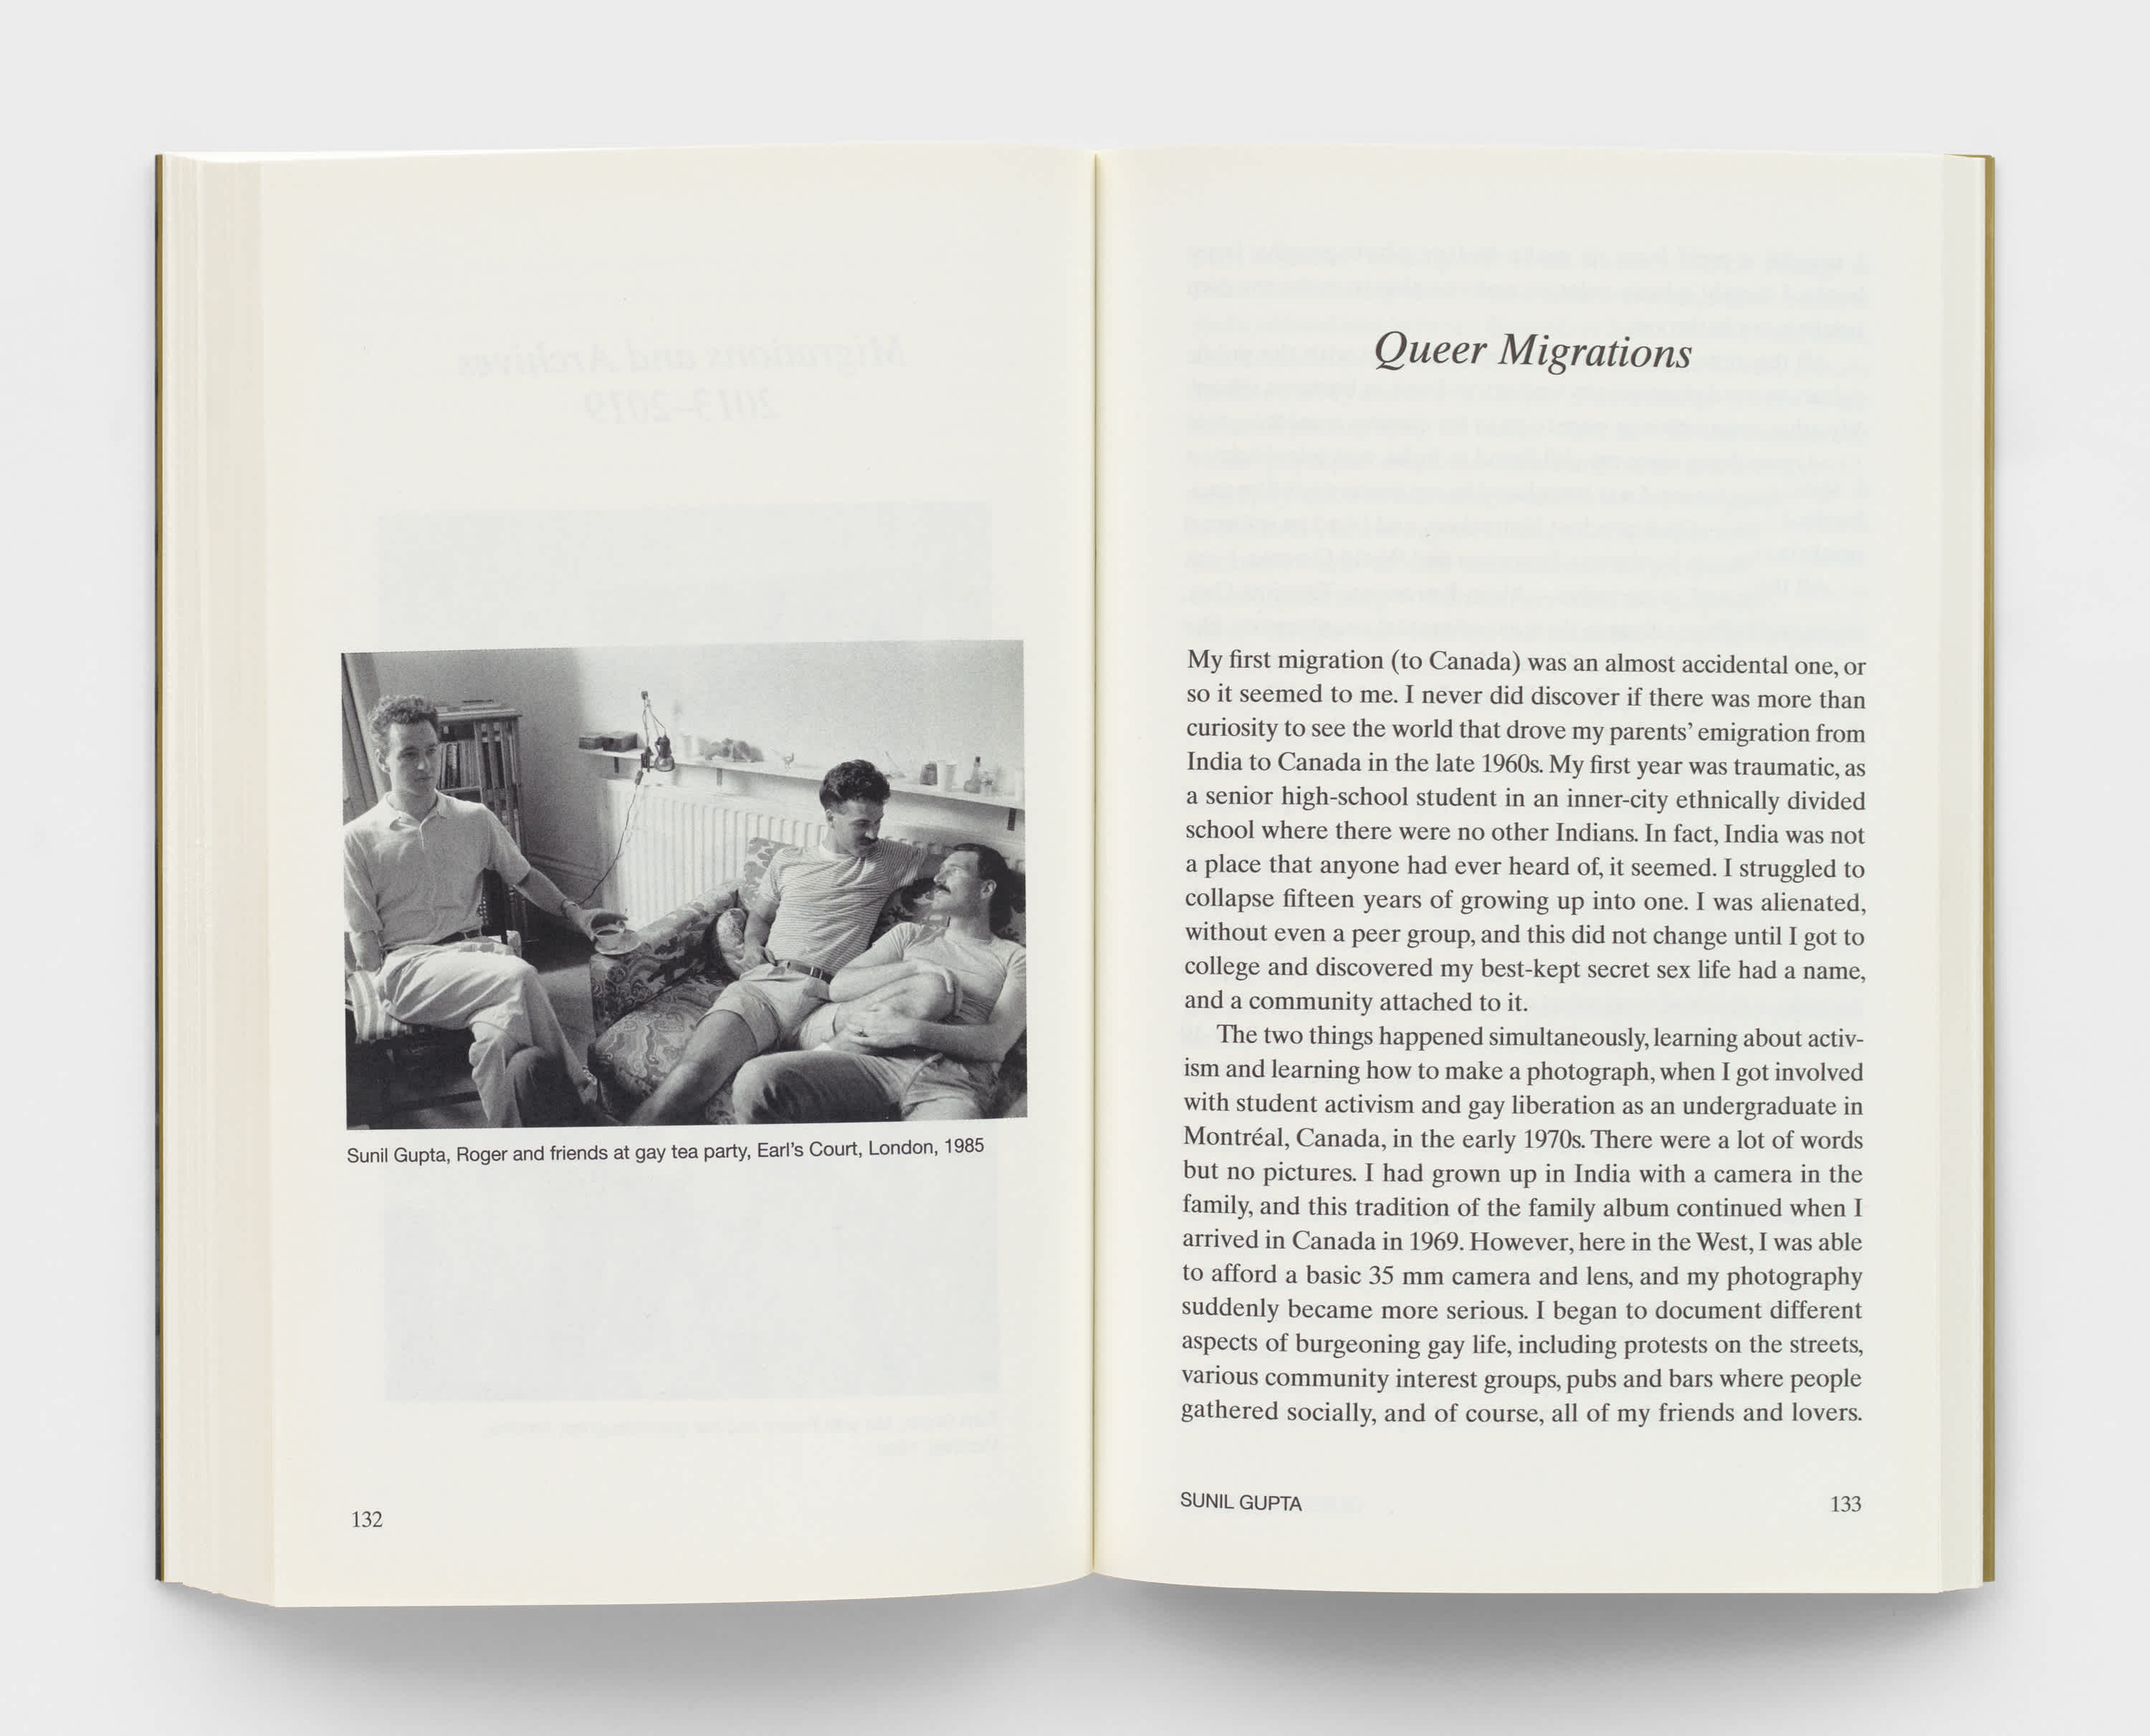 Open book with cream colored pages. A black and white photograph of three men sitting on couches is on the left page. Essay text is on the right page. 